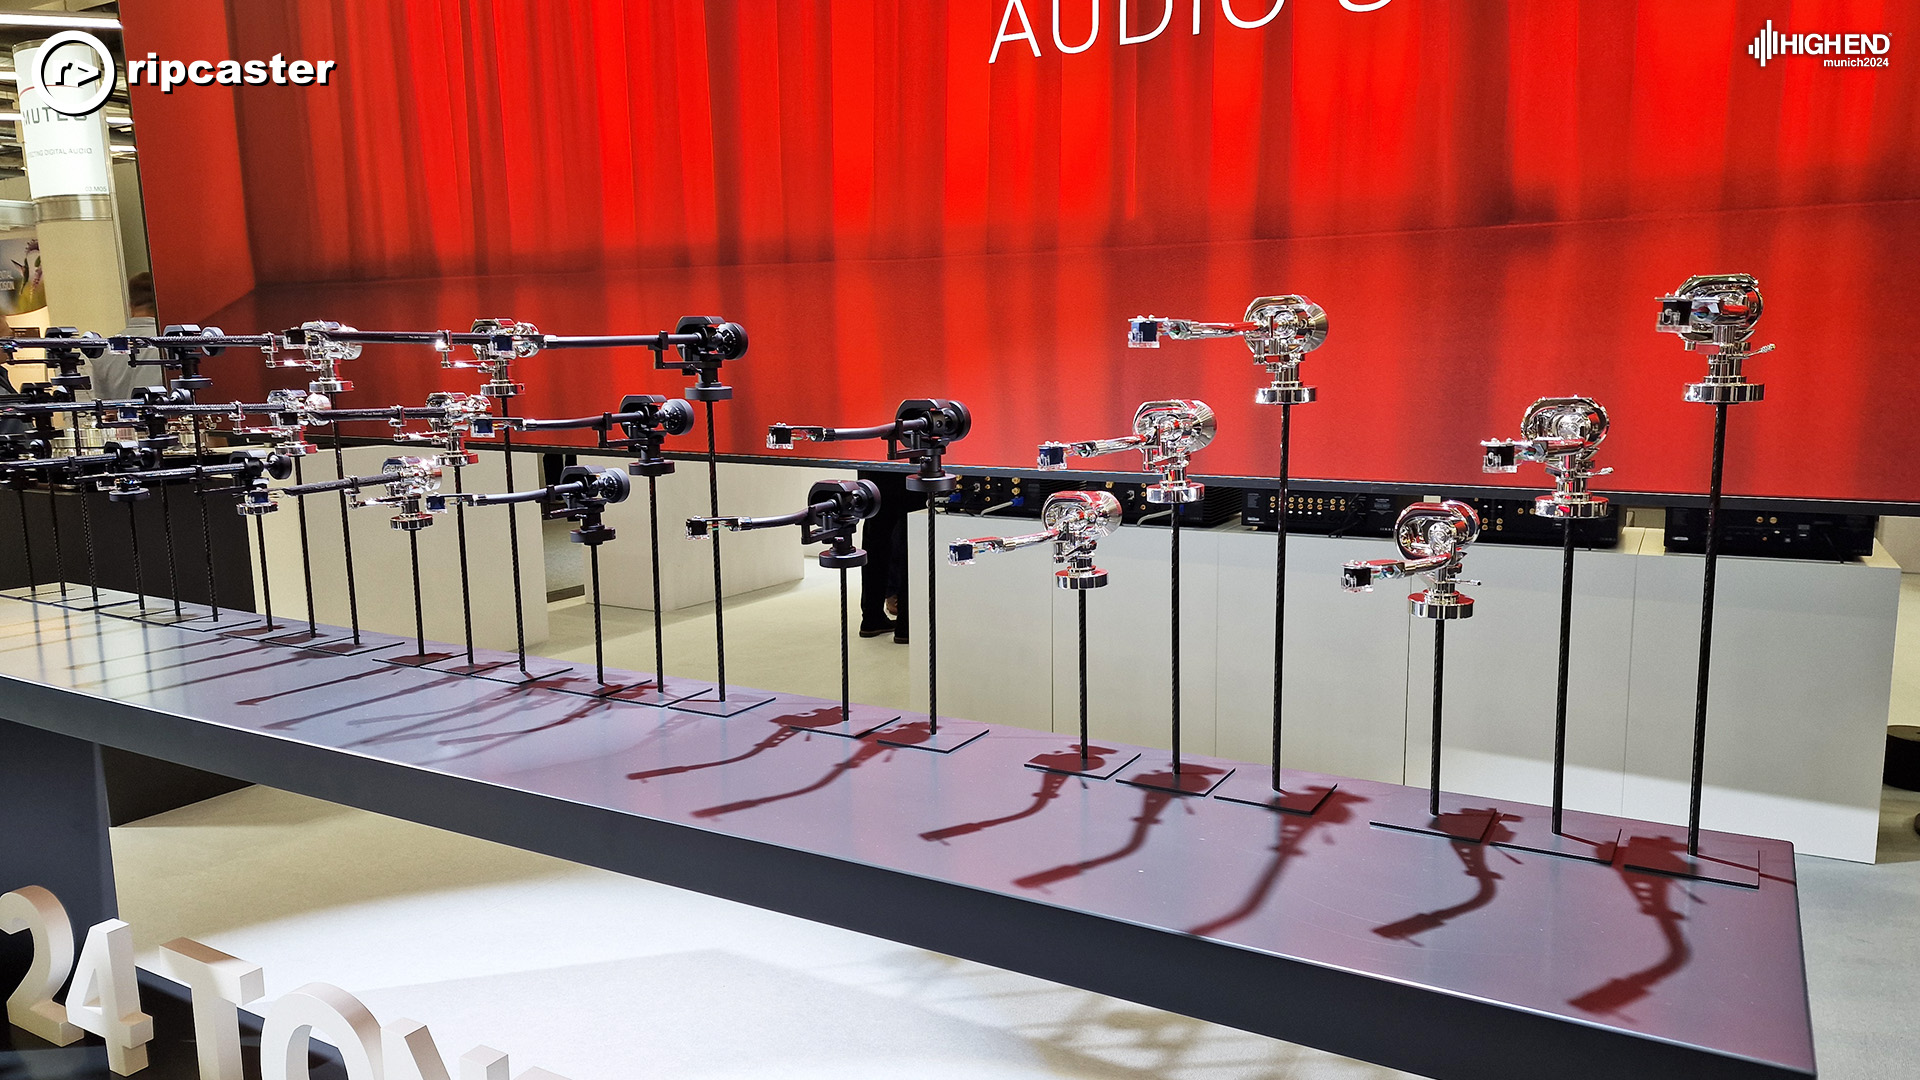 A stunning arrangement of Tonearms from Project - they are all on long sticks and lined up beside each other at different heights.  There's a red backdrop.